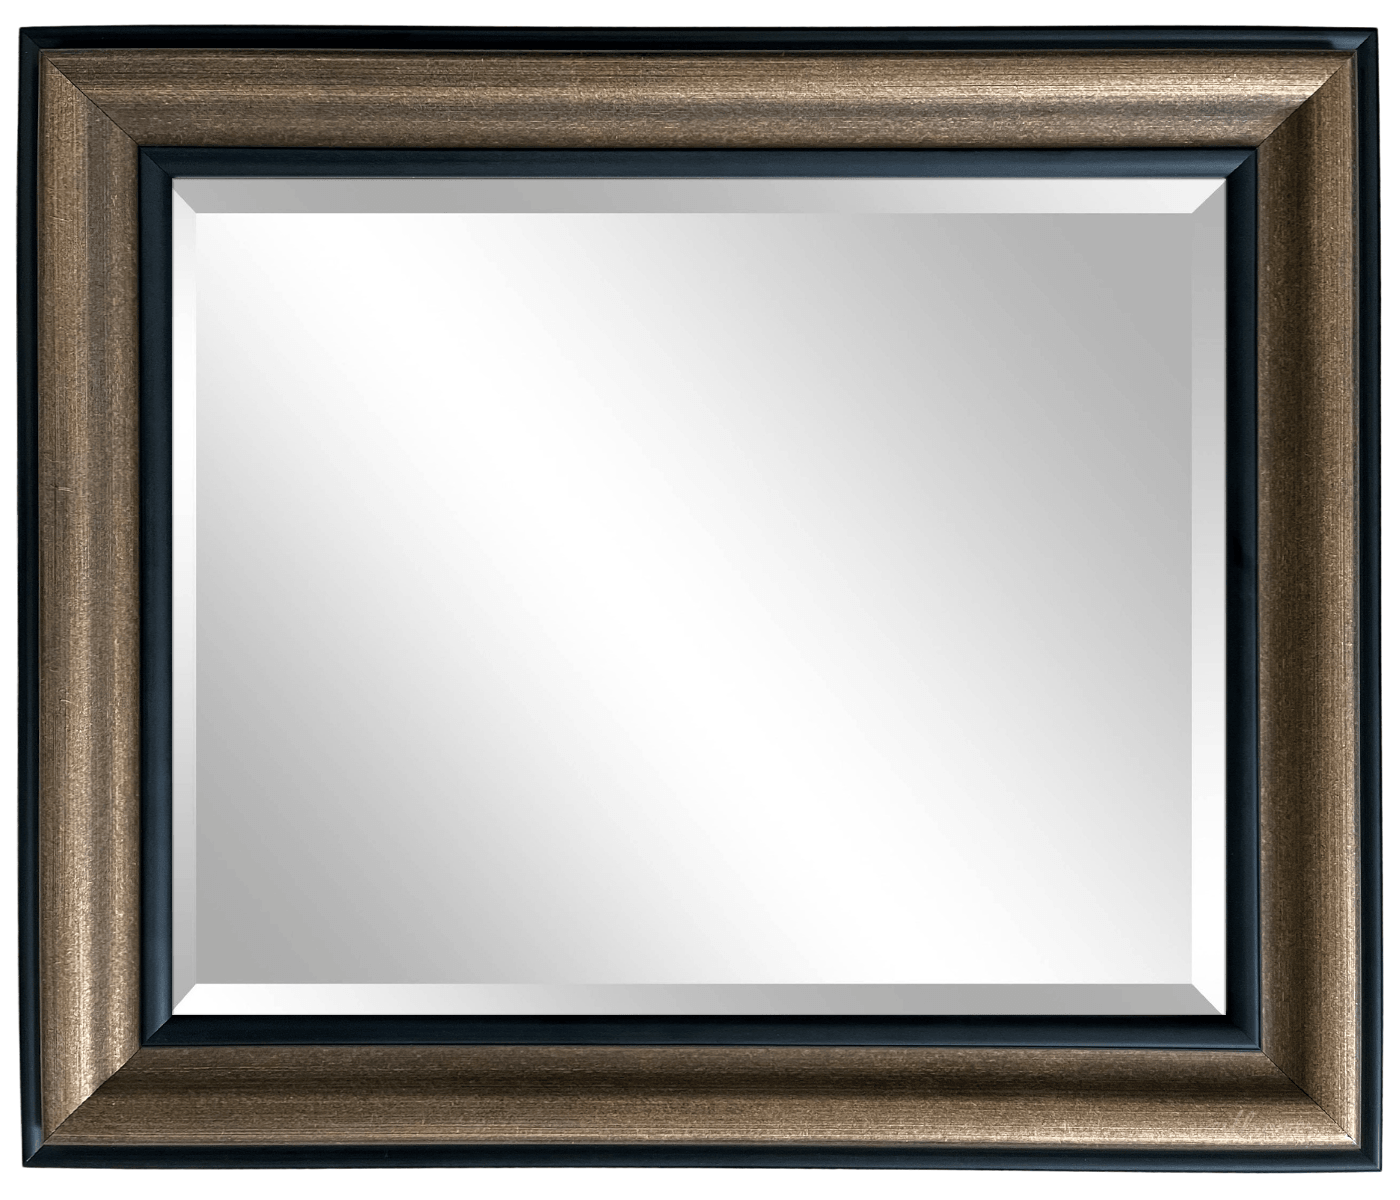 Vienna Rustic Vintage Gold Black Trim Finish Traditional Style Wood Framed Wall Mirror 3" - West Frames